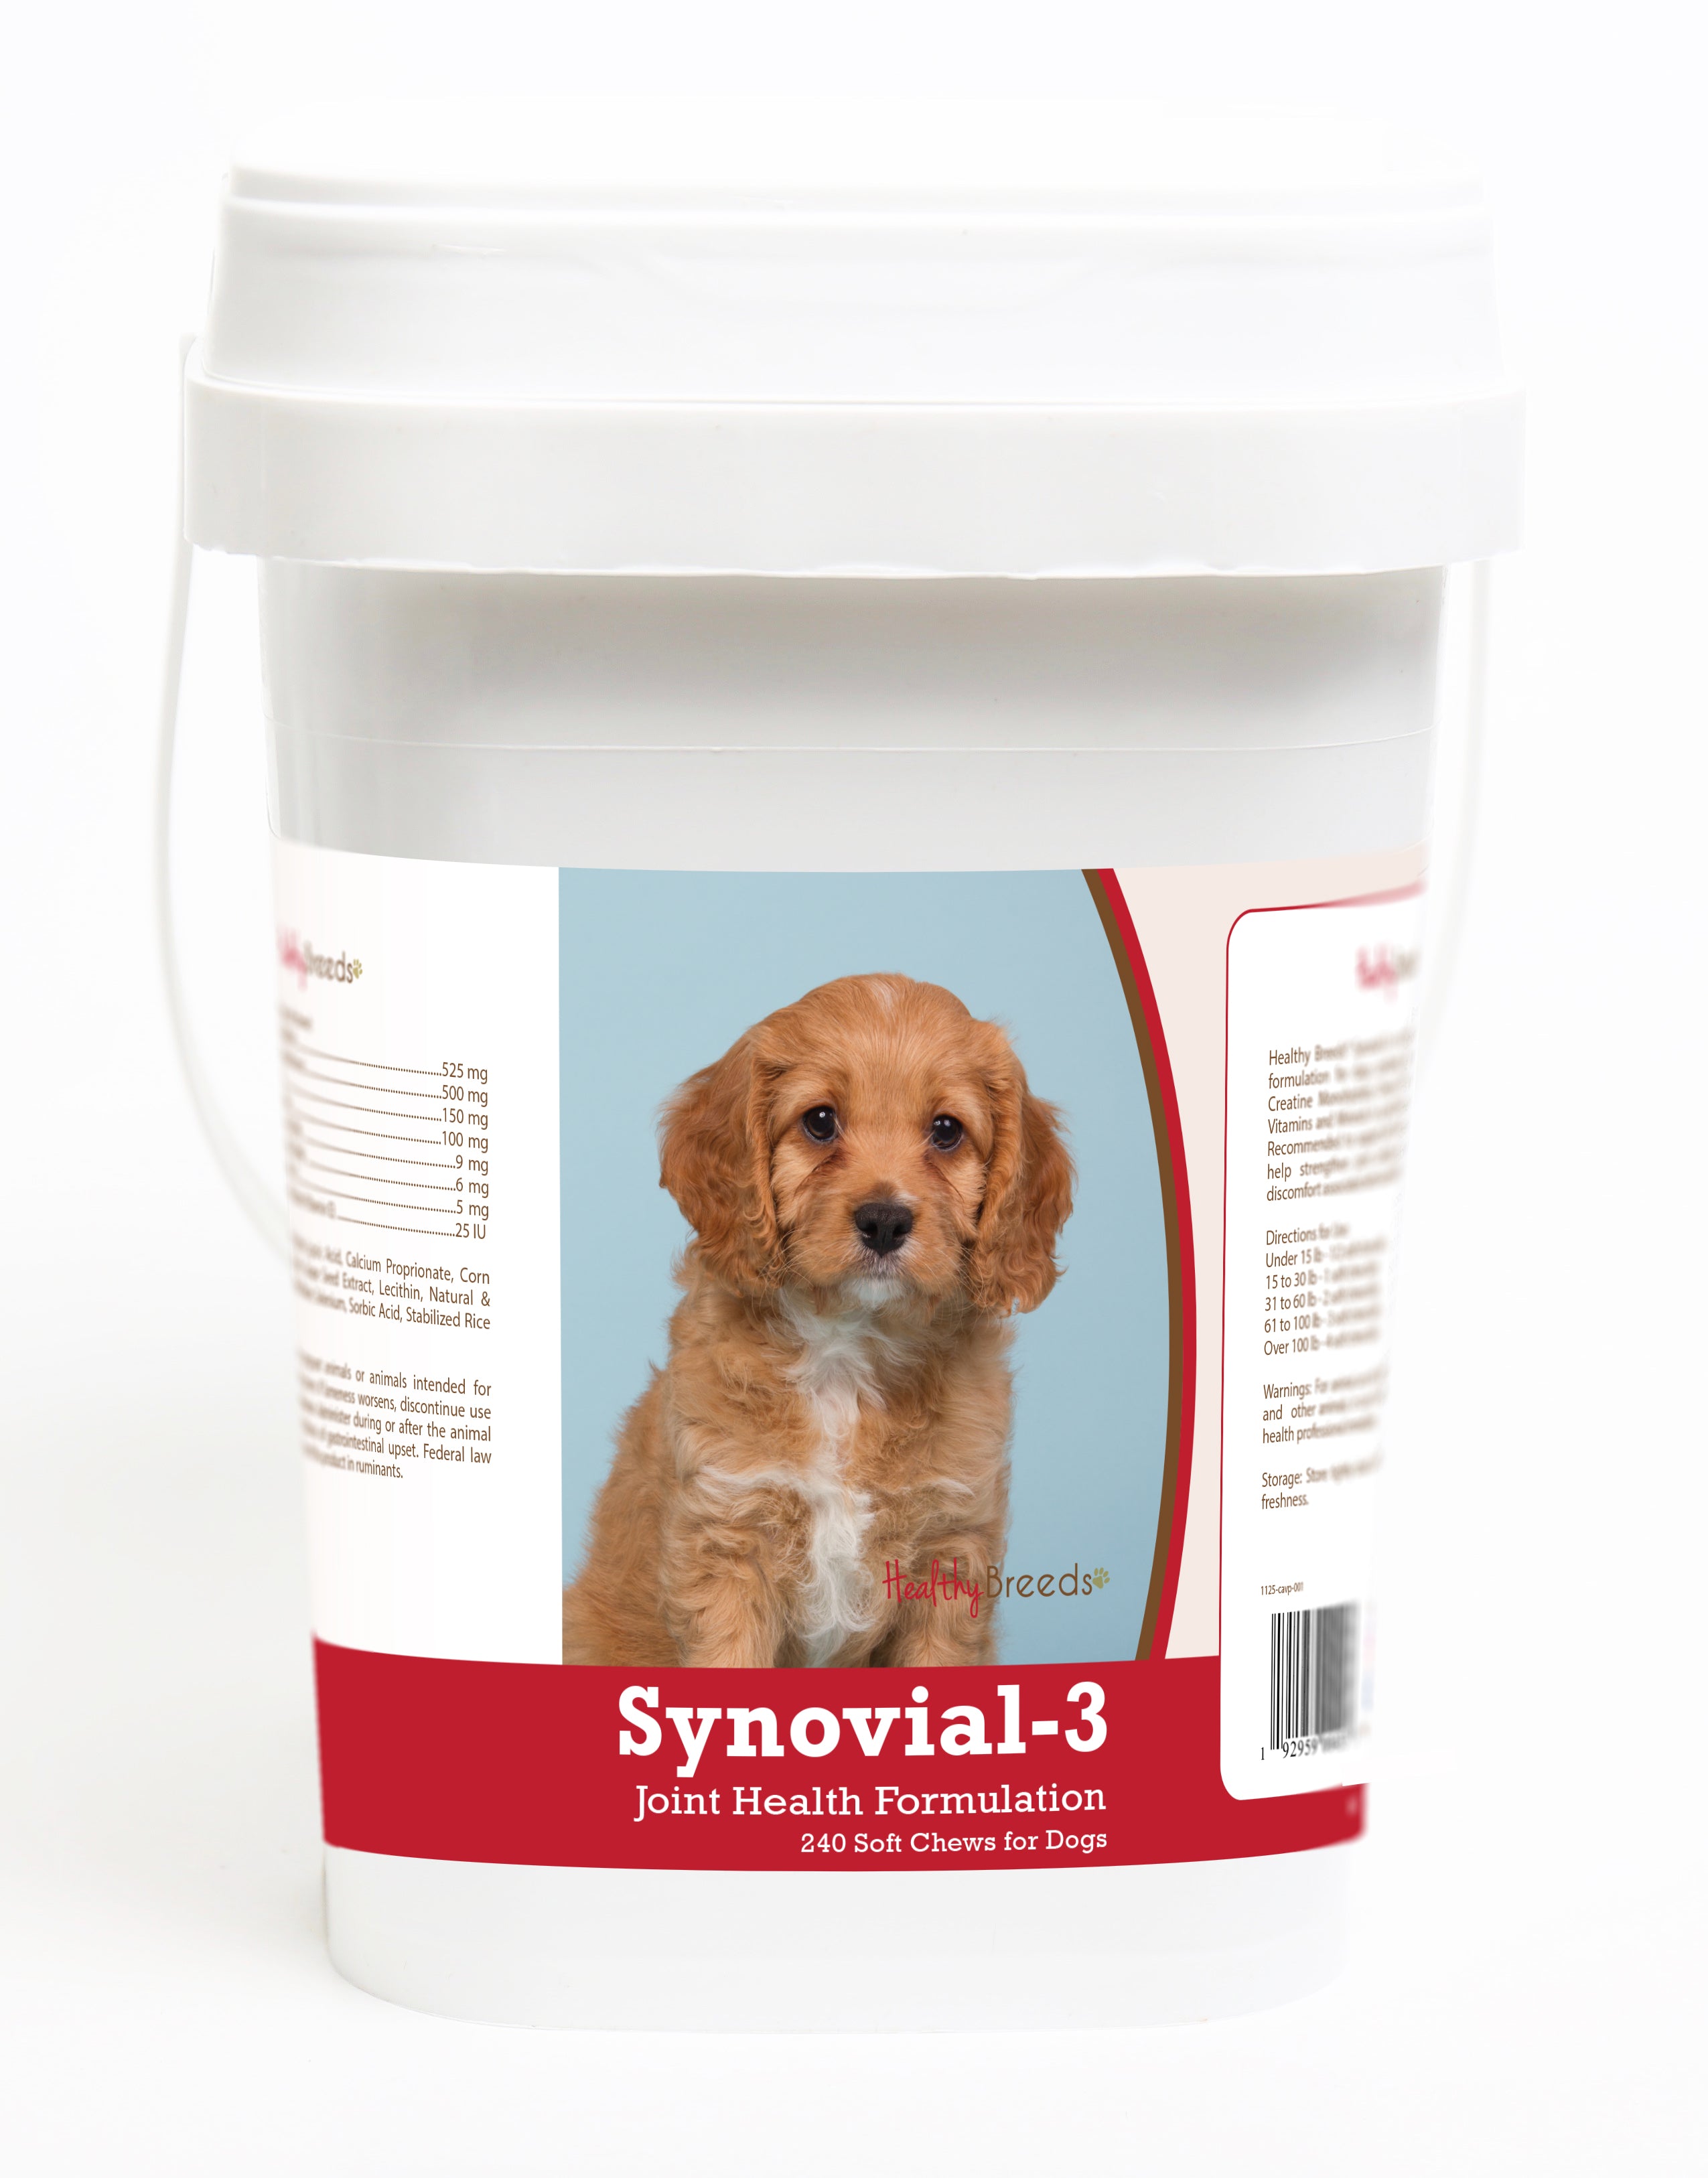 Cavapoo Synovial-3 Joint Health Formulation Soft Chews 240 Count